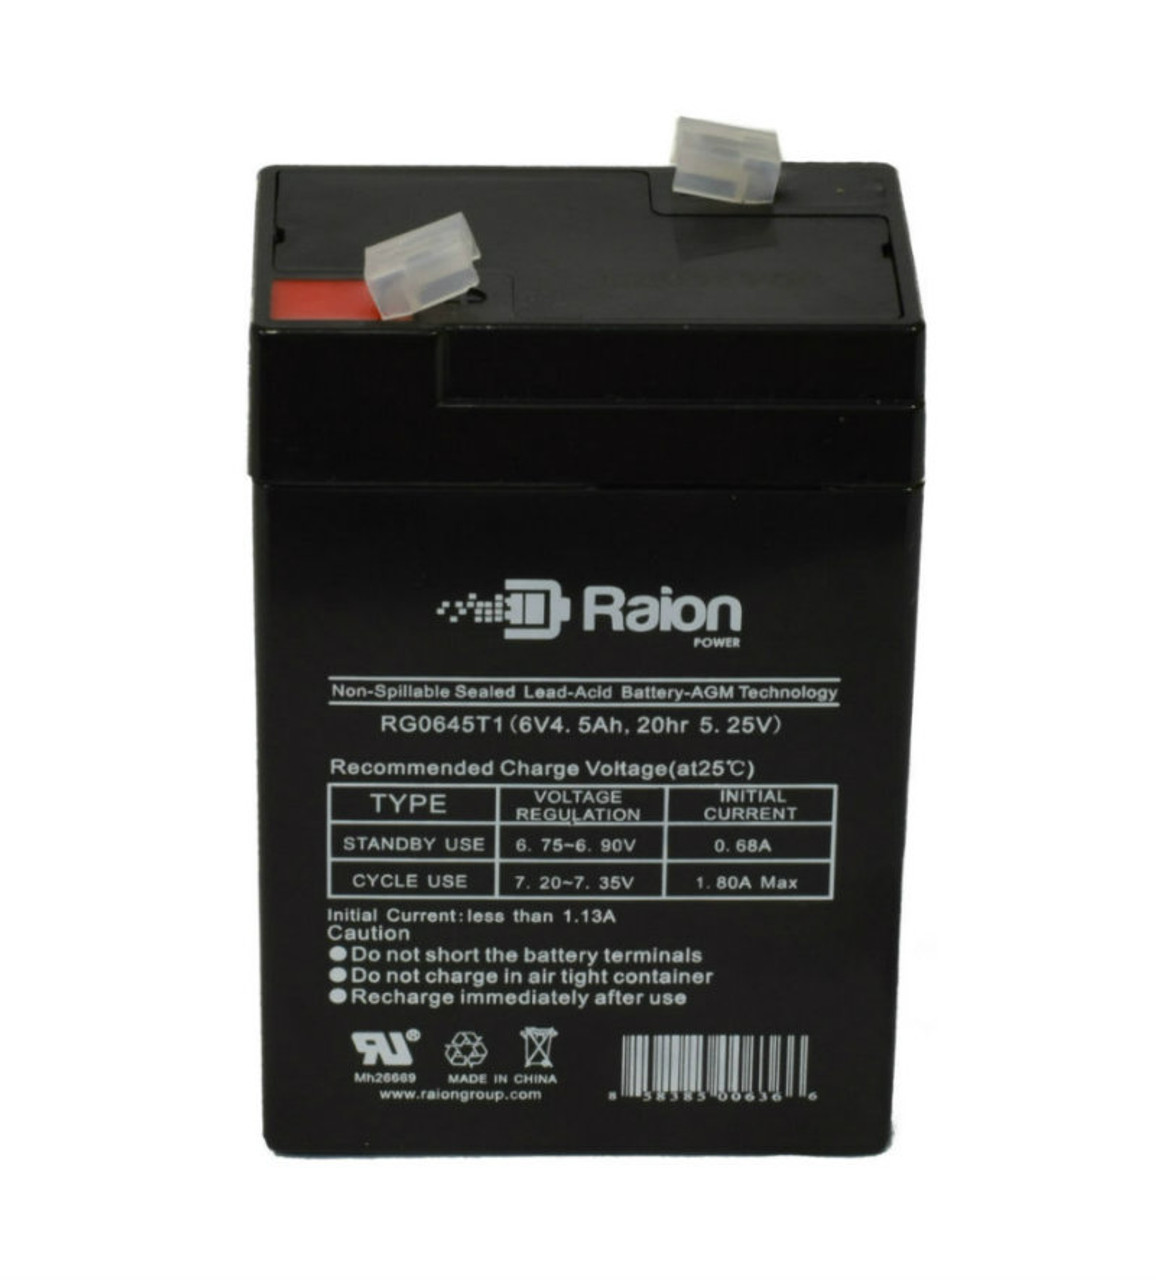 Raion Power RG0645T1 Replacement Battery Cartridge for Gaston GT6-4.5